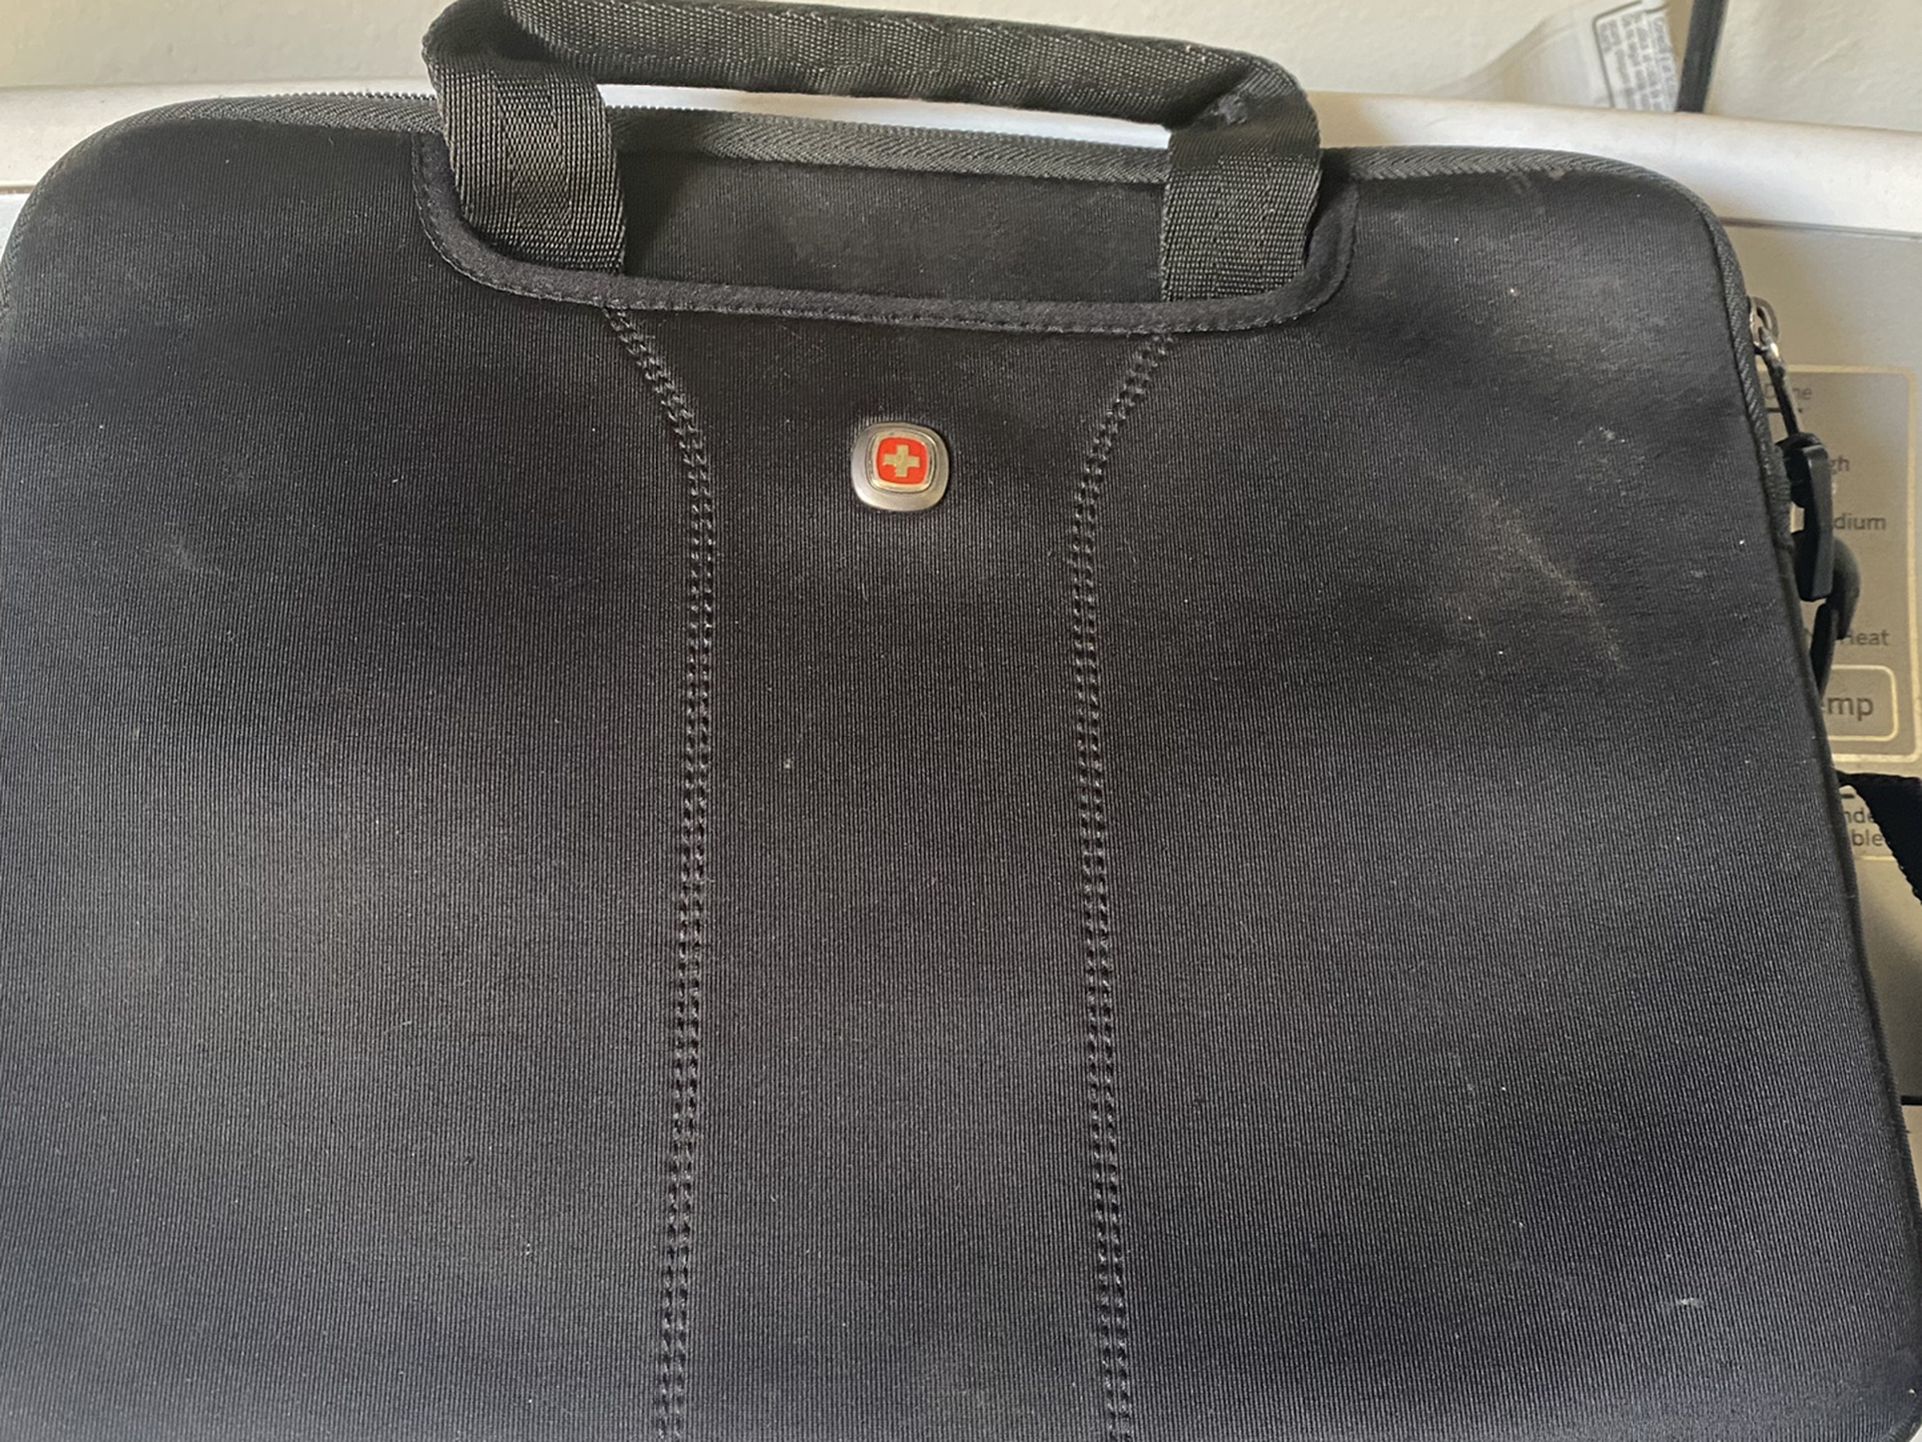 Small Laptop Carrier